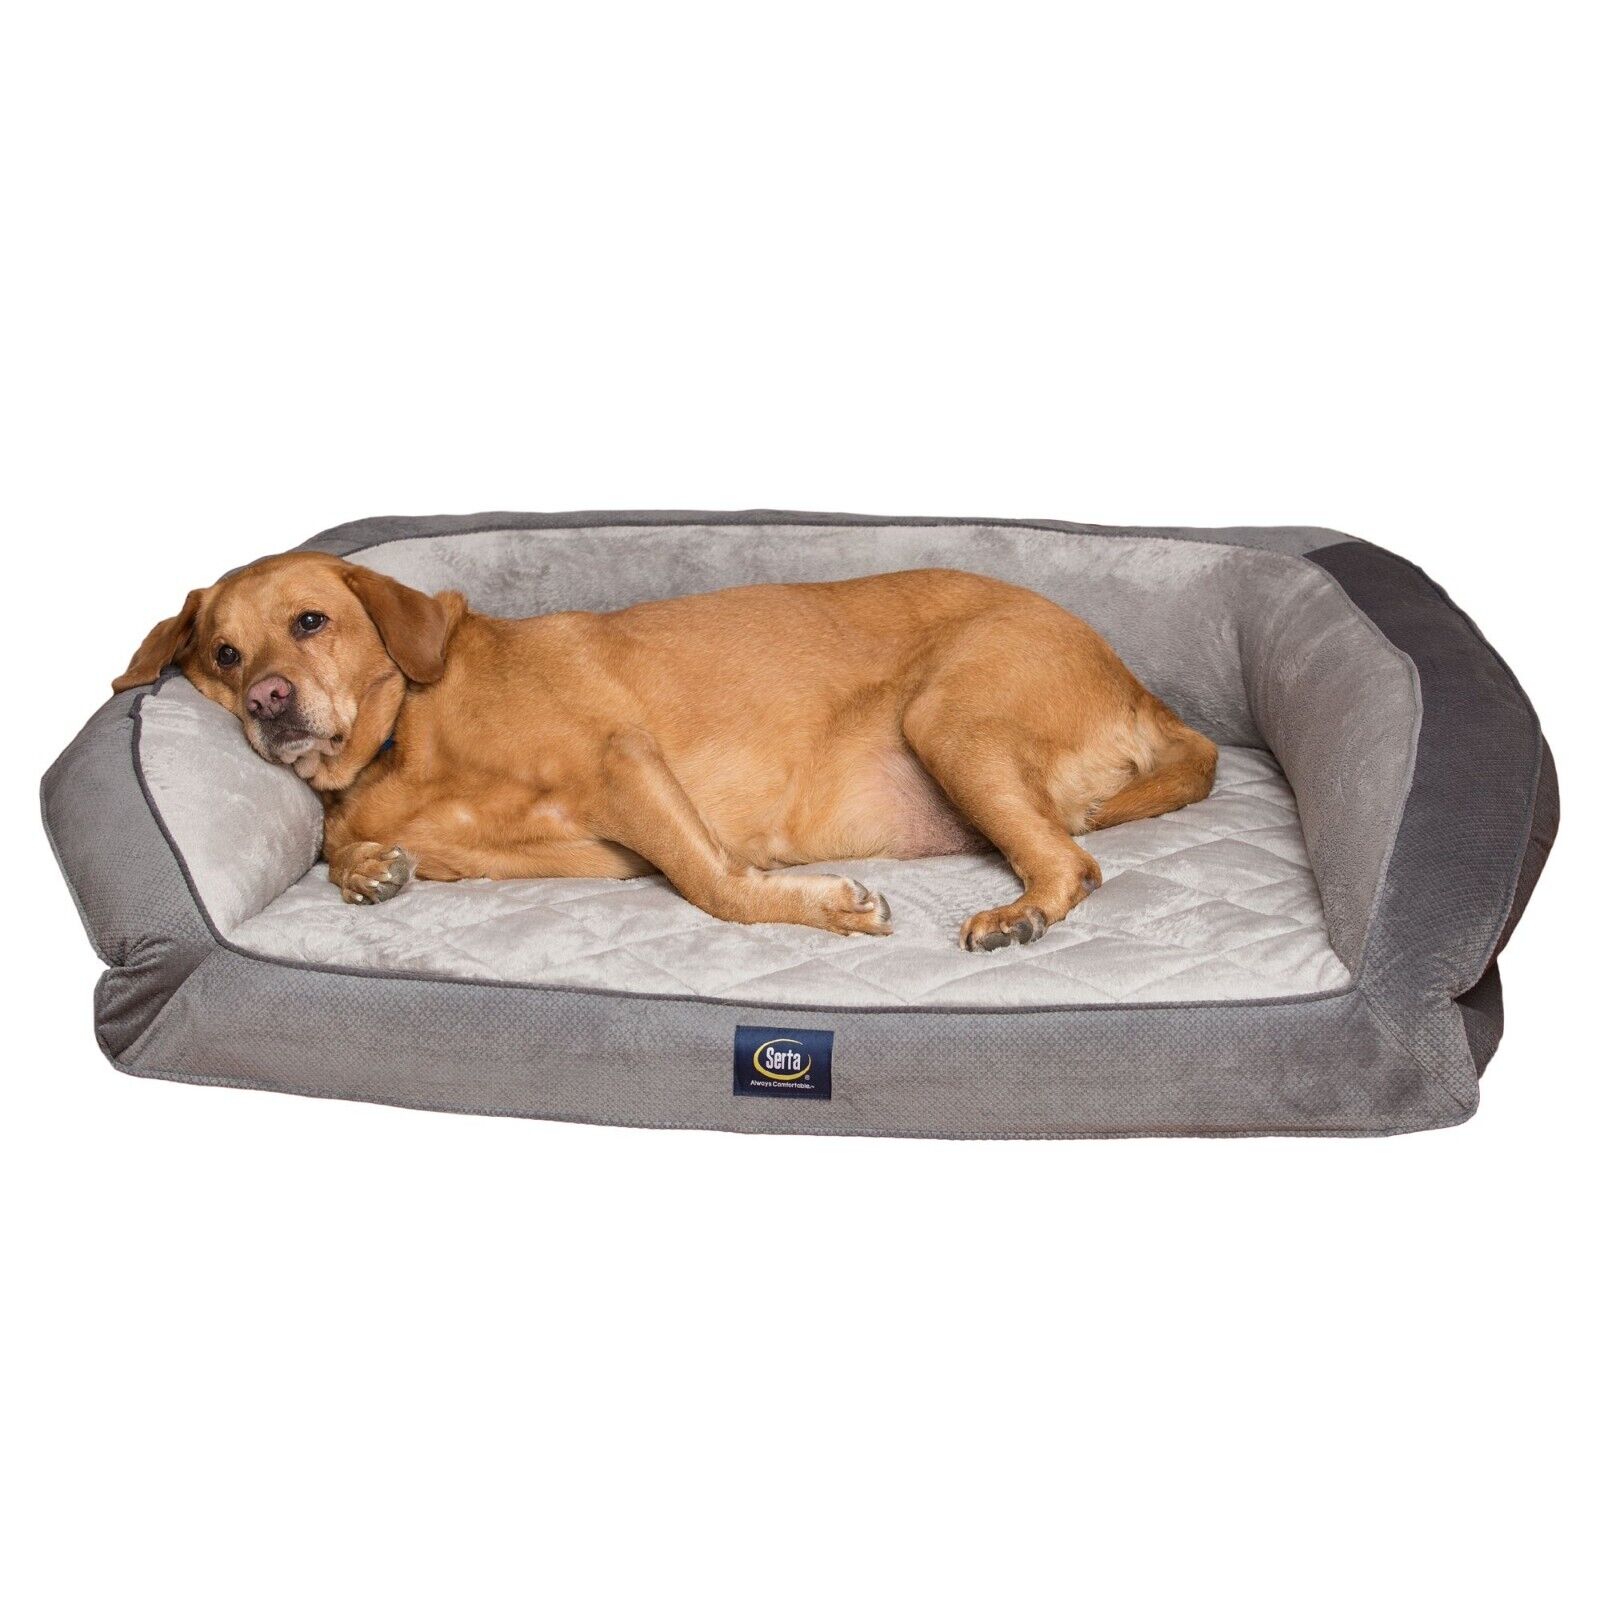 Serta Quilted Gel Memory Foam Orthopedic Dog Couch Pet Bed, 